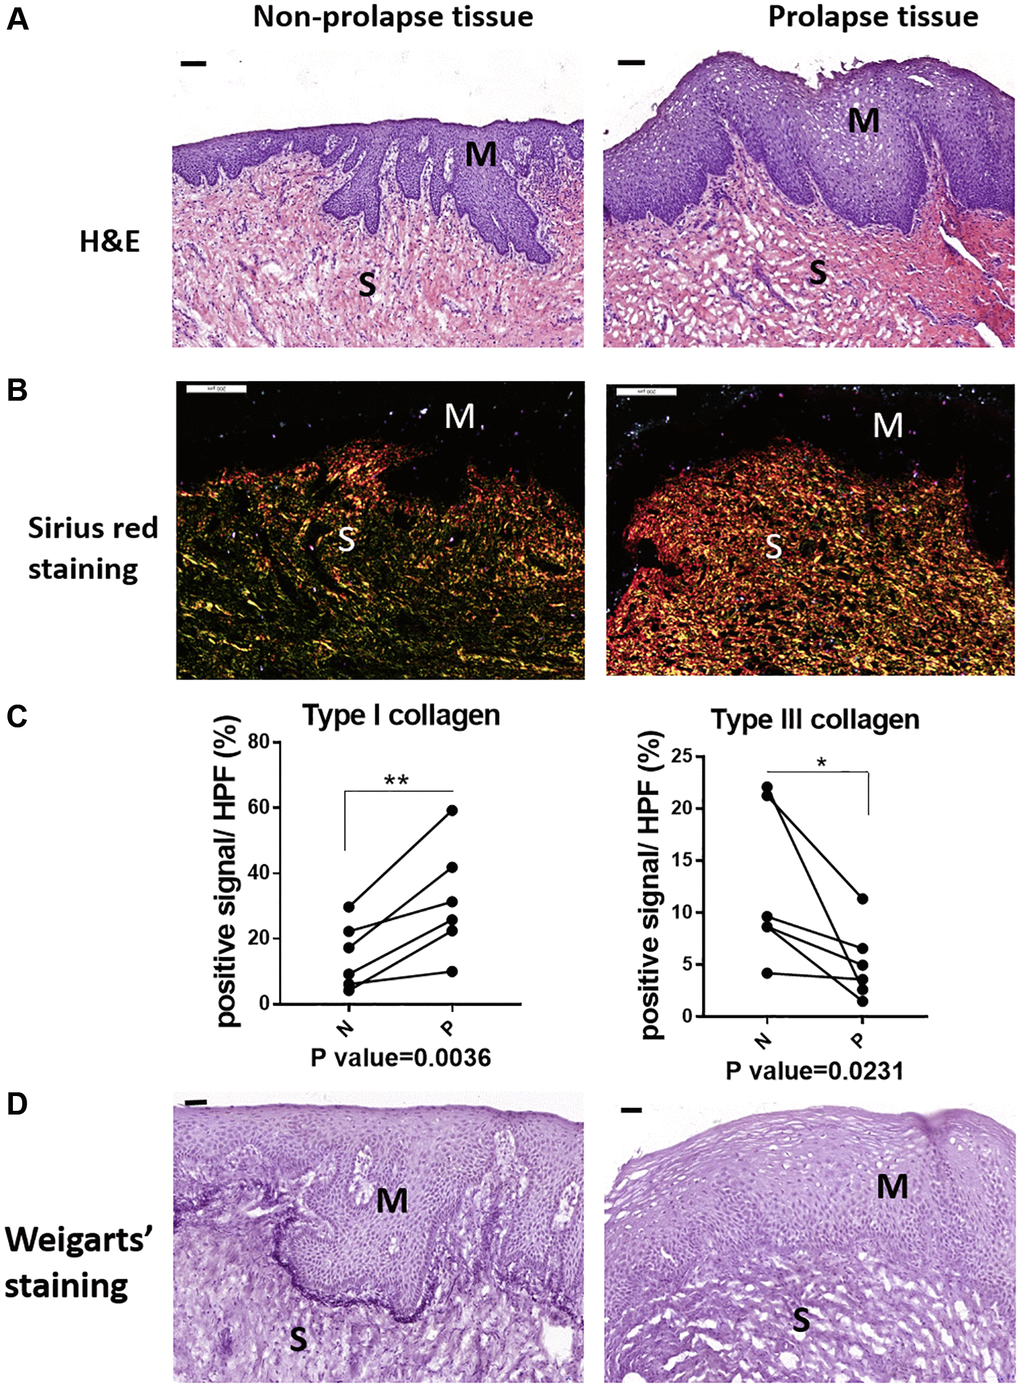 The micro-structural changes in vagina tissue of pelvic organ prolapsed patients. (A) HE staining revealed obvious microstructure porosity and disappeared Vicious Angle structure in the prolapsed tissue (M: mucous layer, S: submucosa layer. scale bar 100 um), (B) Sirius red staining showed increased type I collagen and decreased type III collagen in the prolapsed tissue (type I collagen was red and bright yellow, type III collagen was green, scale bar 200 um), (C) Sirius red staining as in B was quantified, the proportion of positive signals area (red signals for type I collage and green signals for type III collagen) in each High Power Field of vision (HPF) were quantified, n = 6 in each group. (D) Weigarts’ staining demonstrated disappeared elastic fibers near basal layer in the prolapsed tissue (scale bar 50 um).